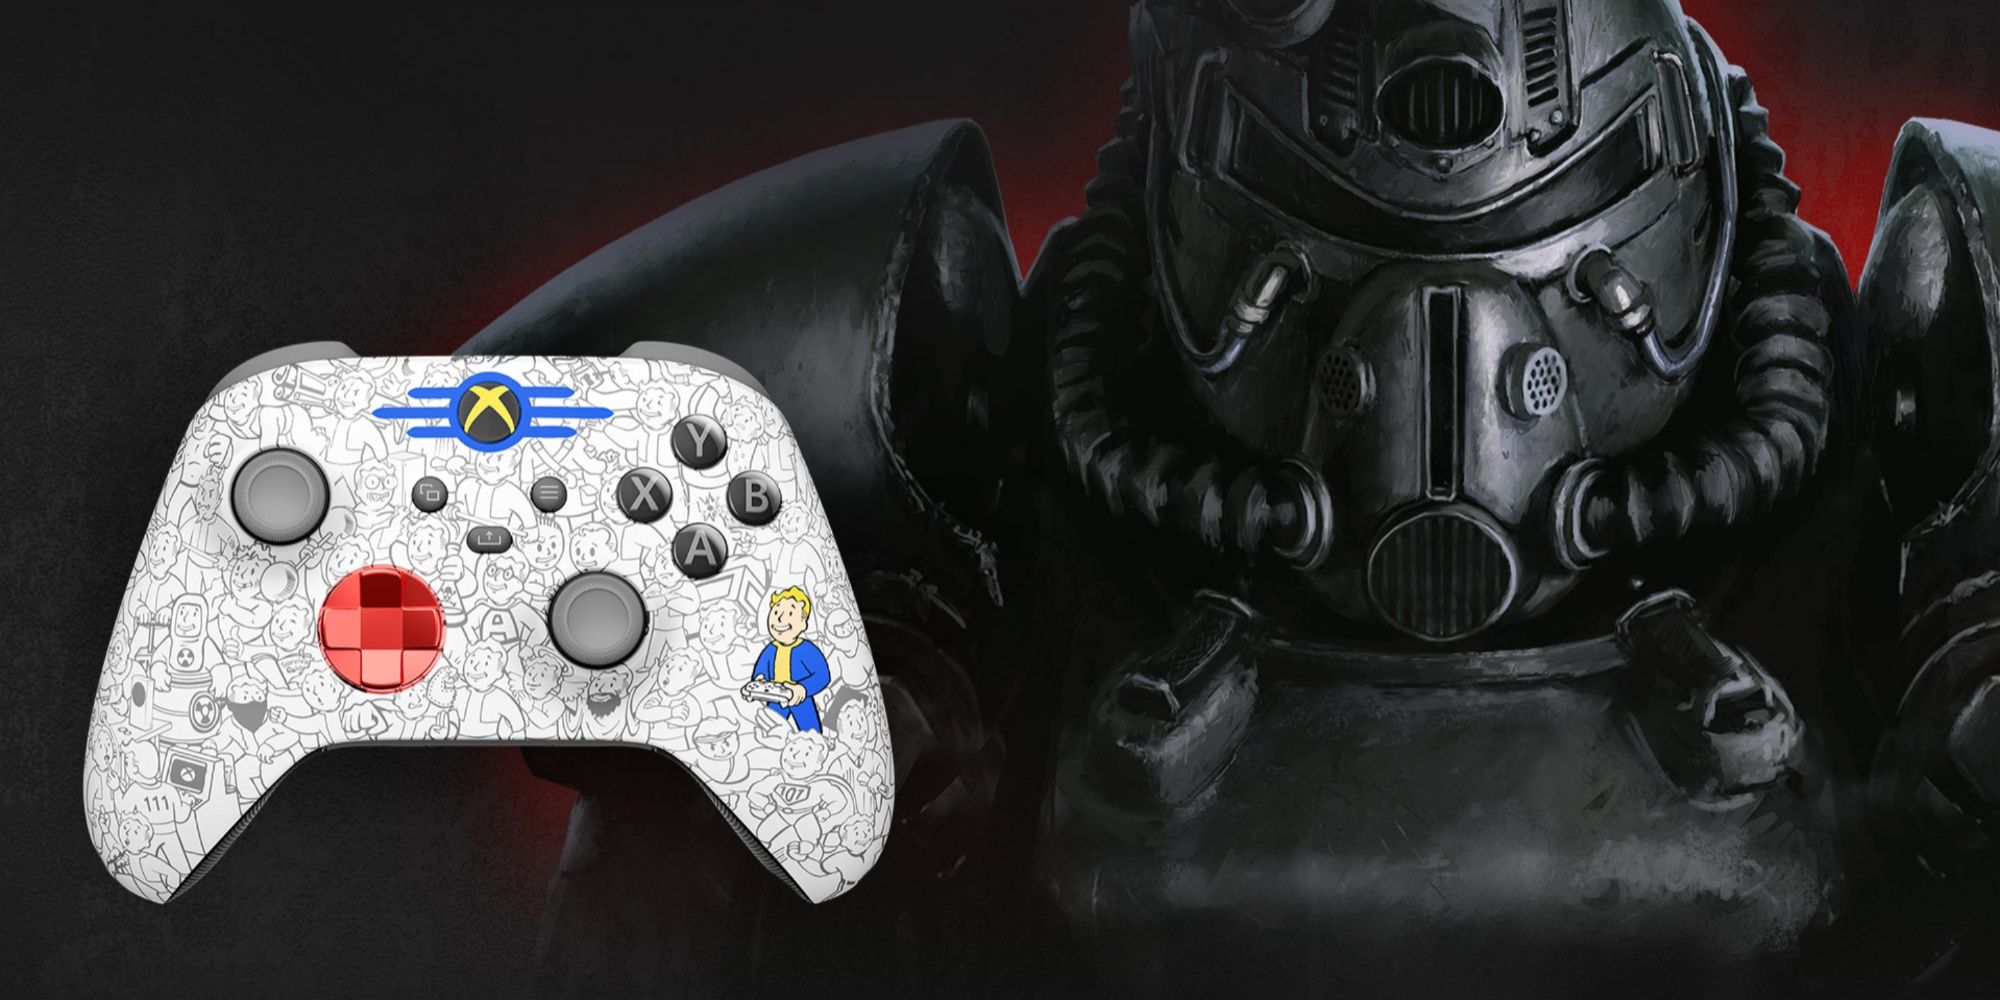 xbox fallout controller next to someone in power armor